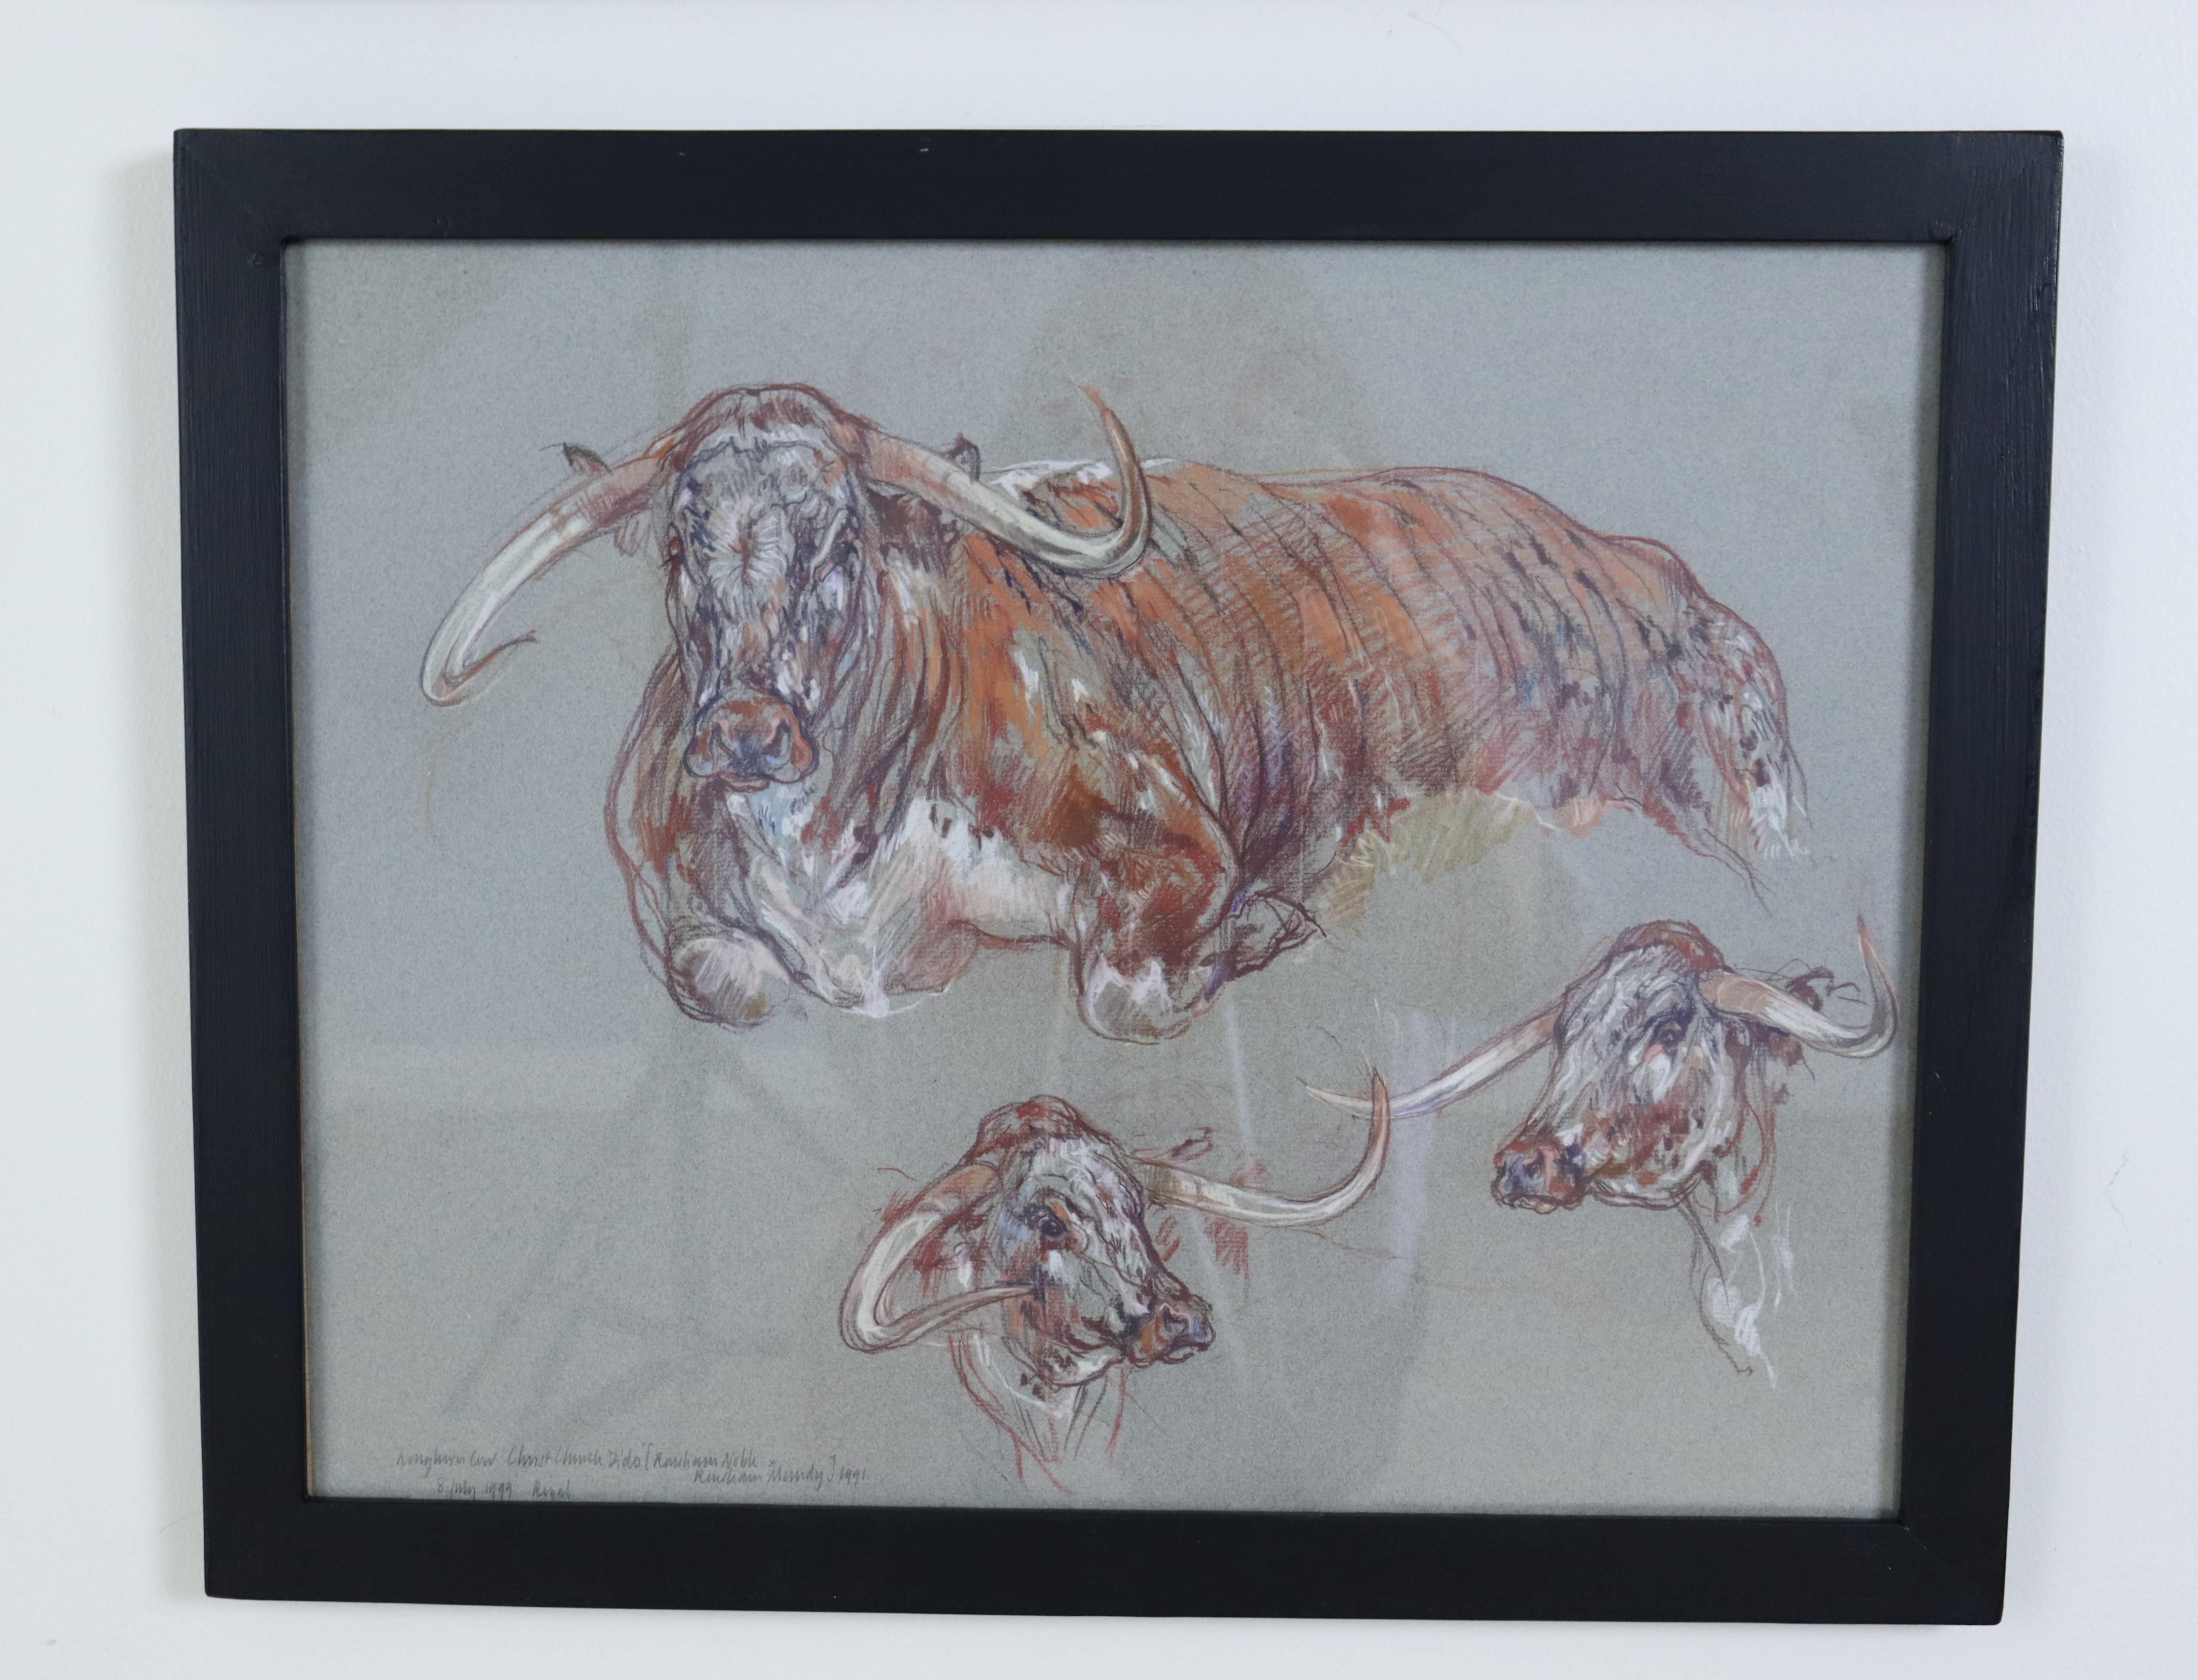 Paper Pair of Original Cow Drawings in Pastel by Leslie Charlotte Benenson - A For Sale